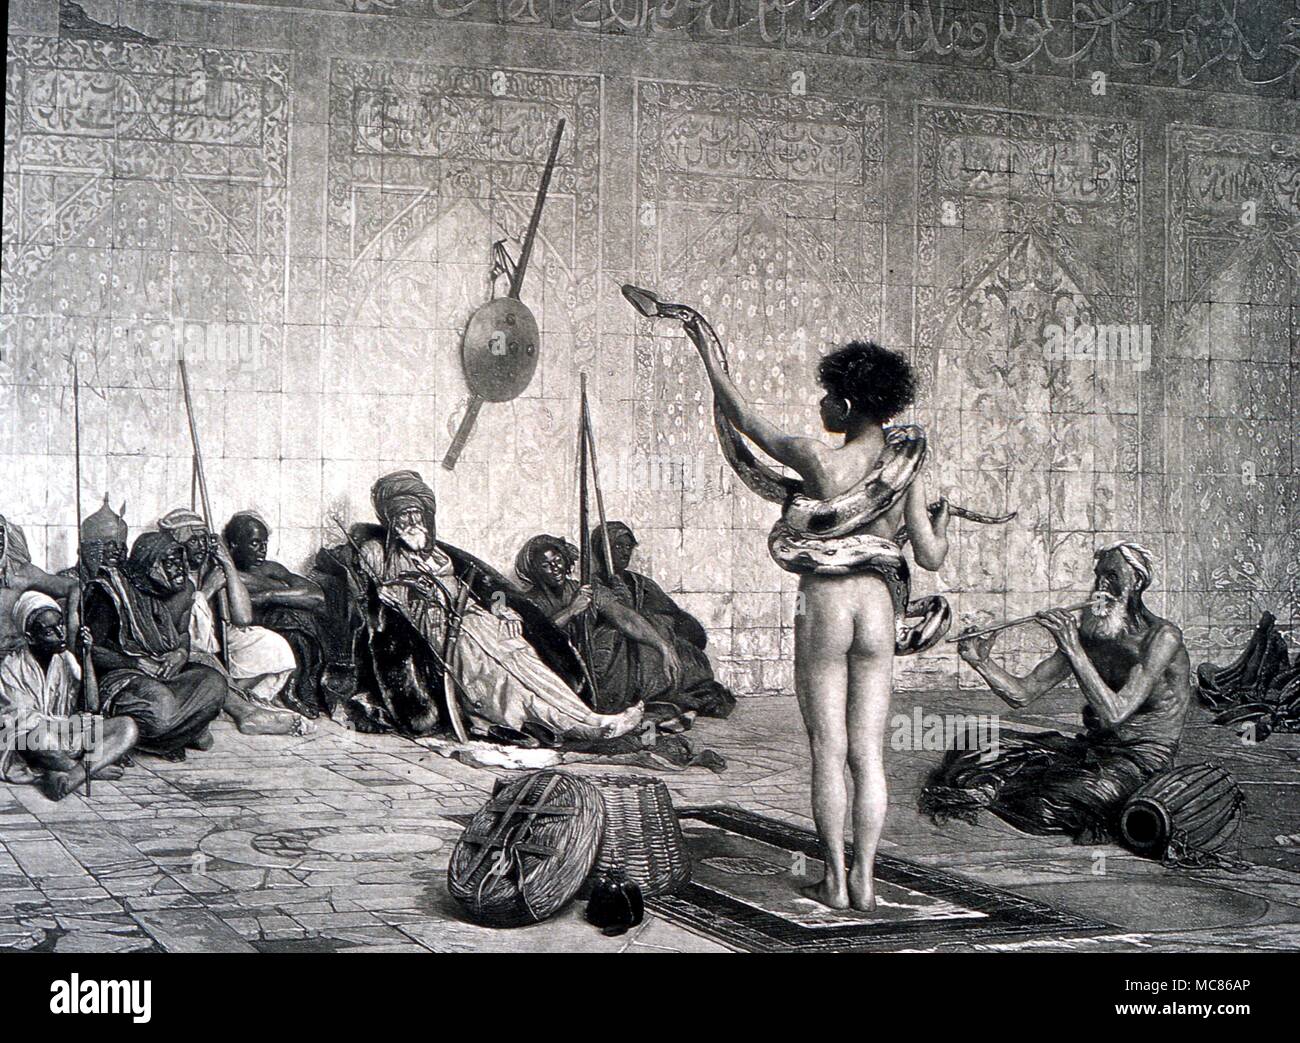 Snakes The Serpent Charmer - painting by J T Gerome, 1894. From the 1895 World Columbian Exposition Catalogue, 'The Art of the World' Stock Photo